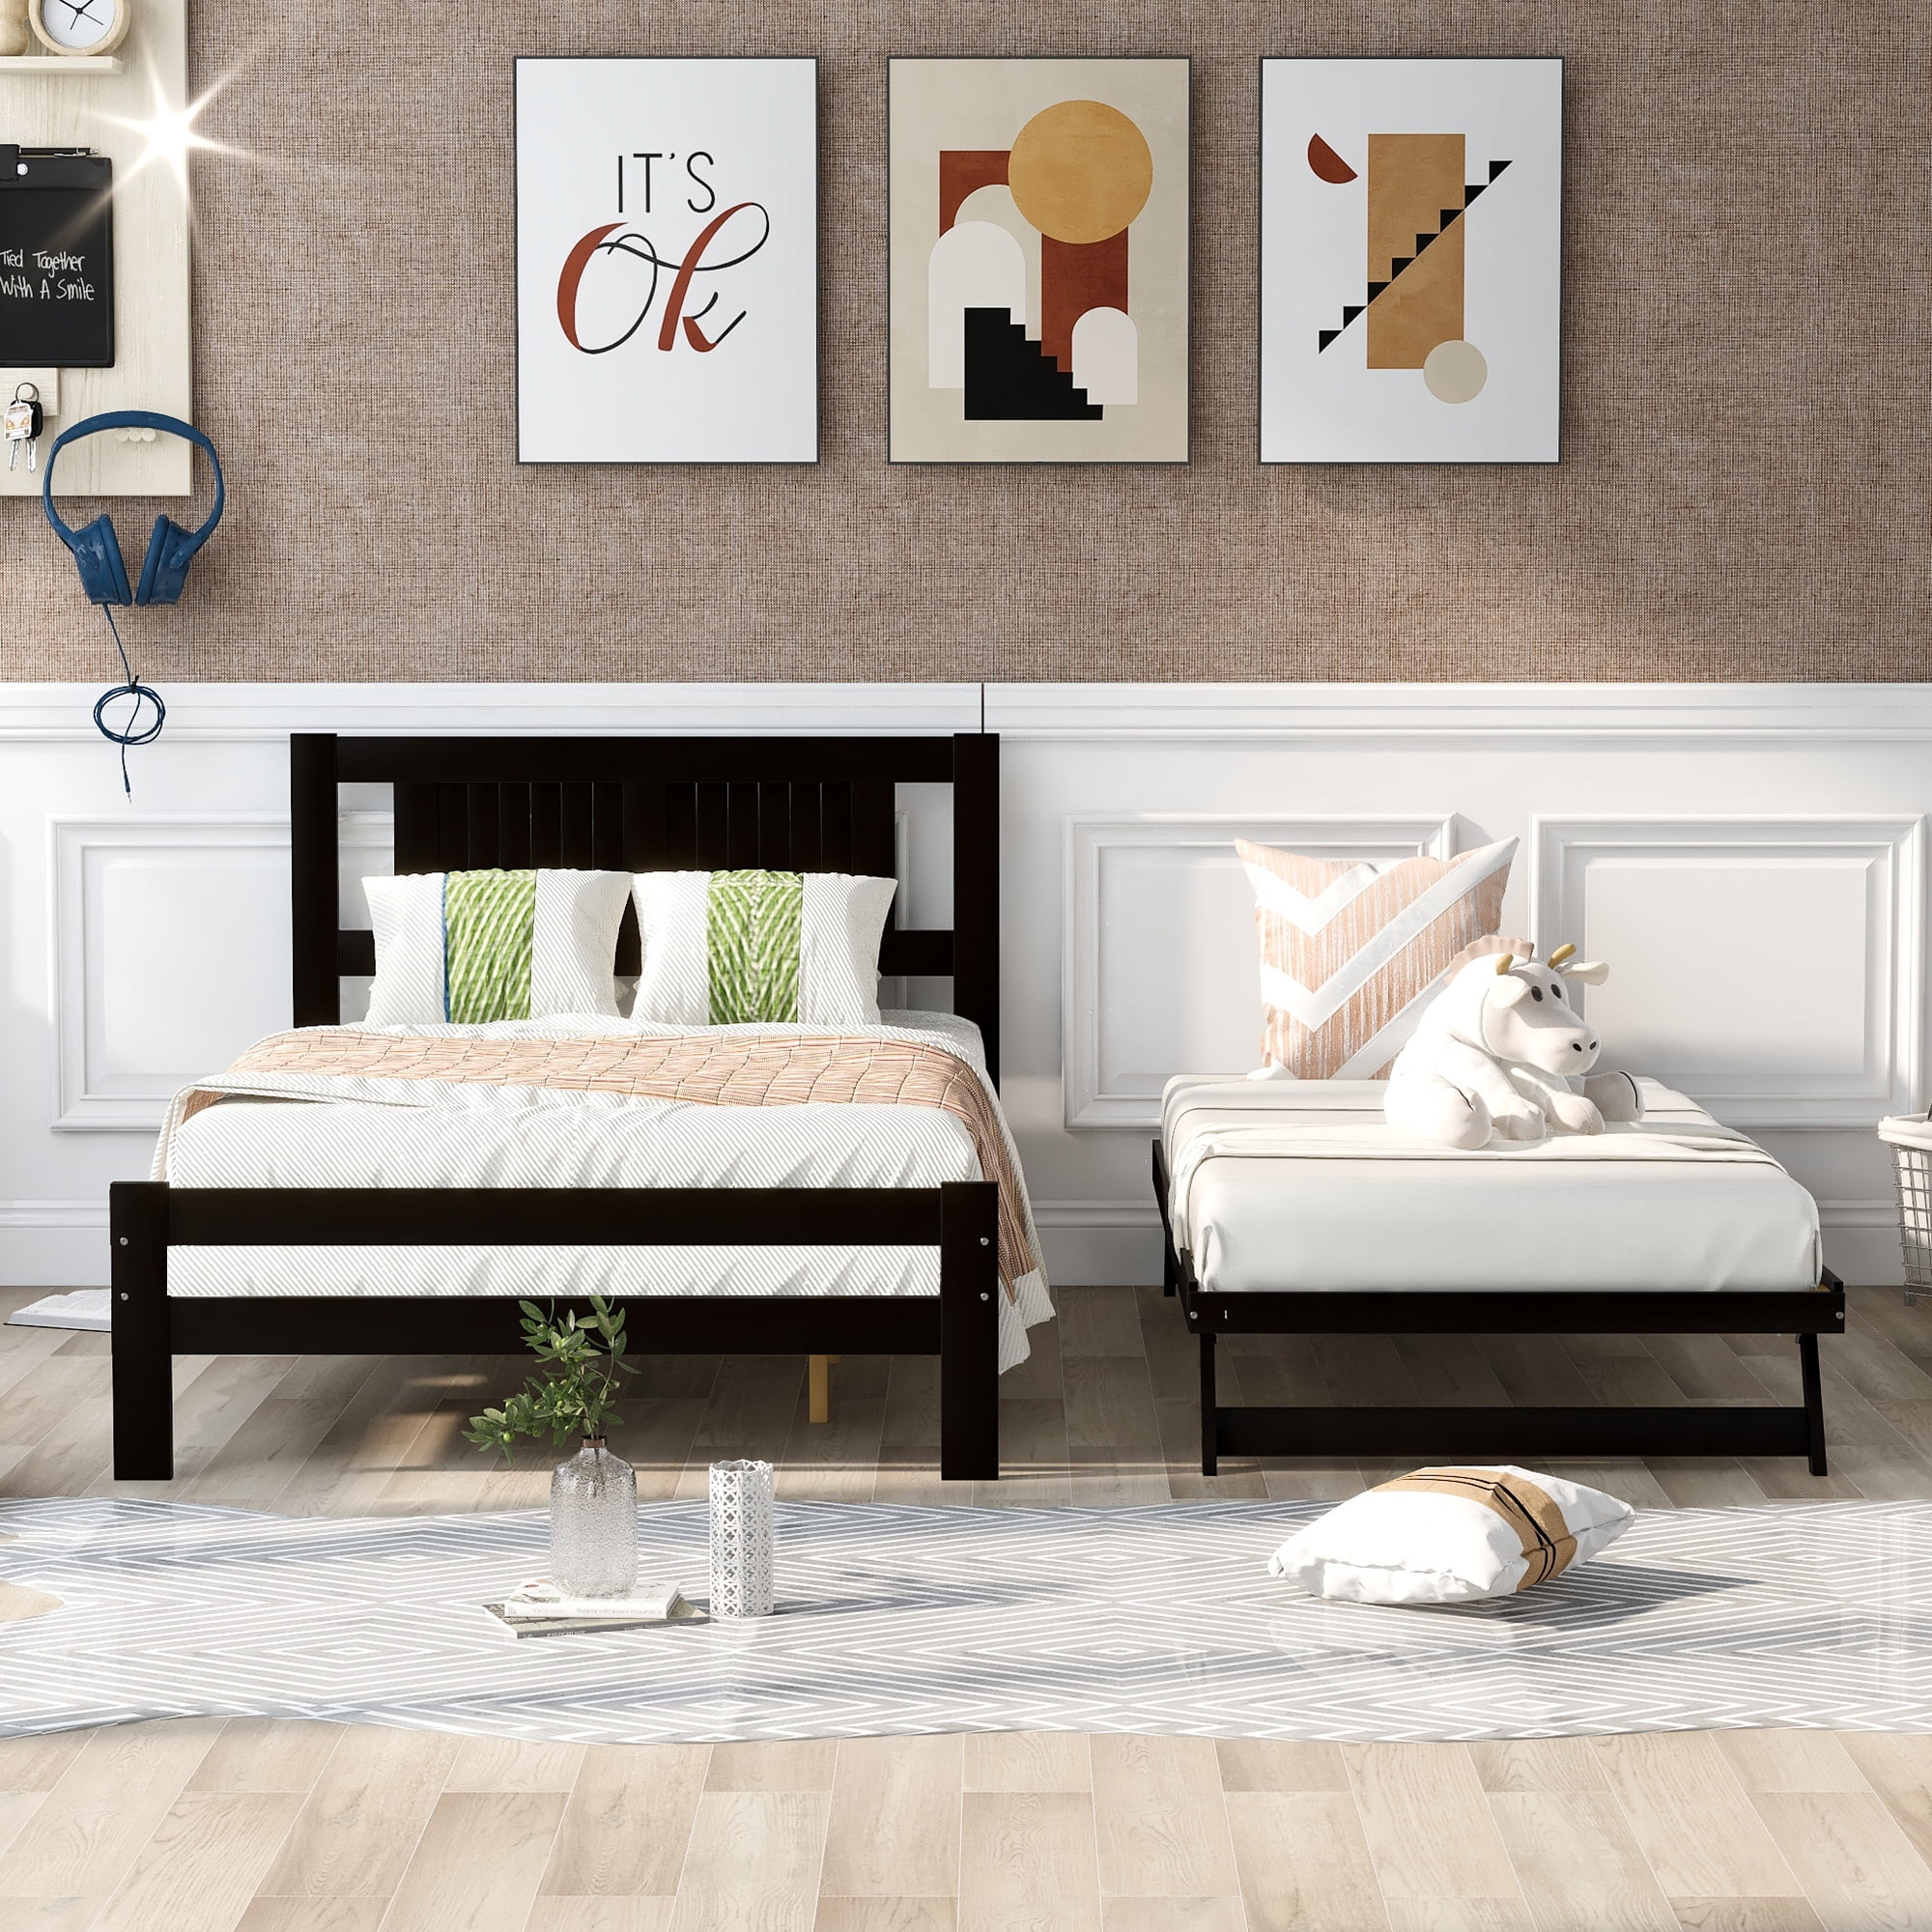 2021 Simple Full-Size Wooden Platform Bed with Adjustable Casters 